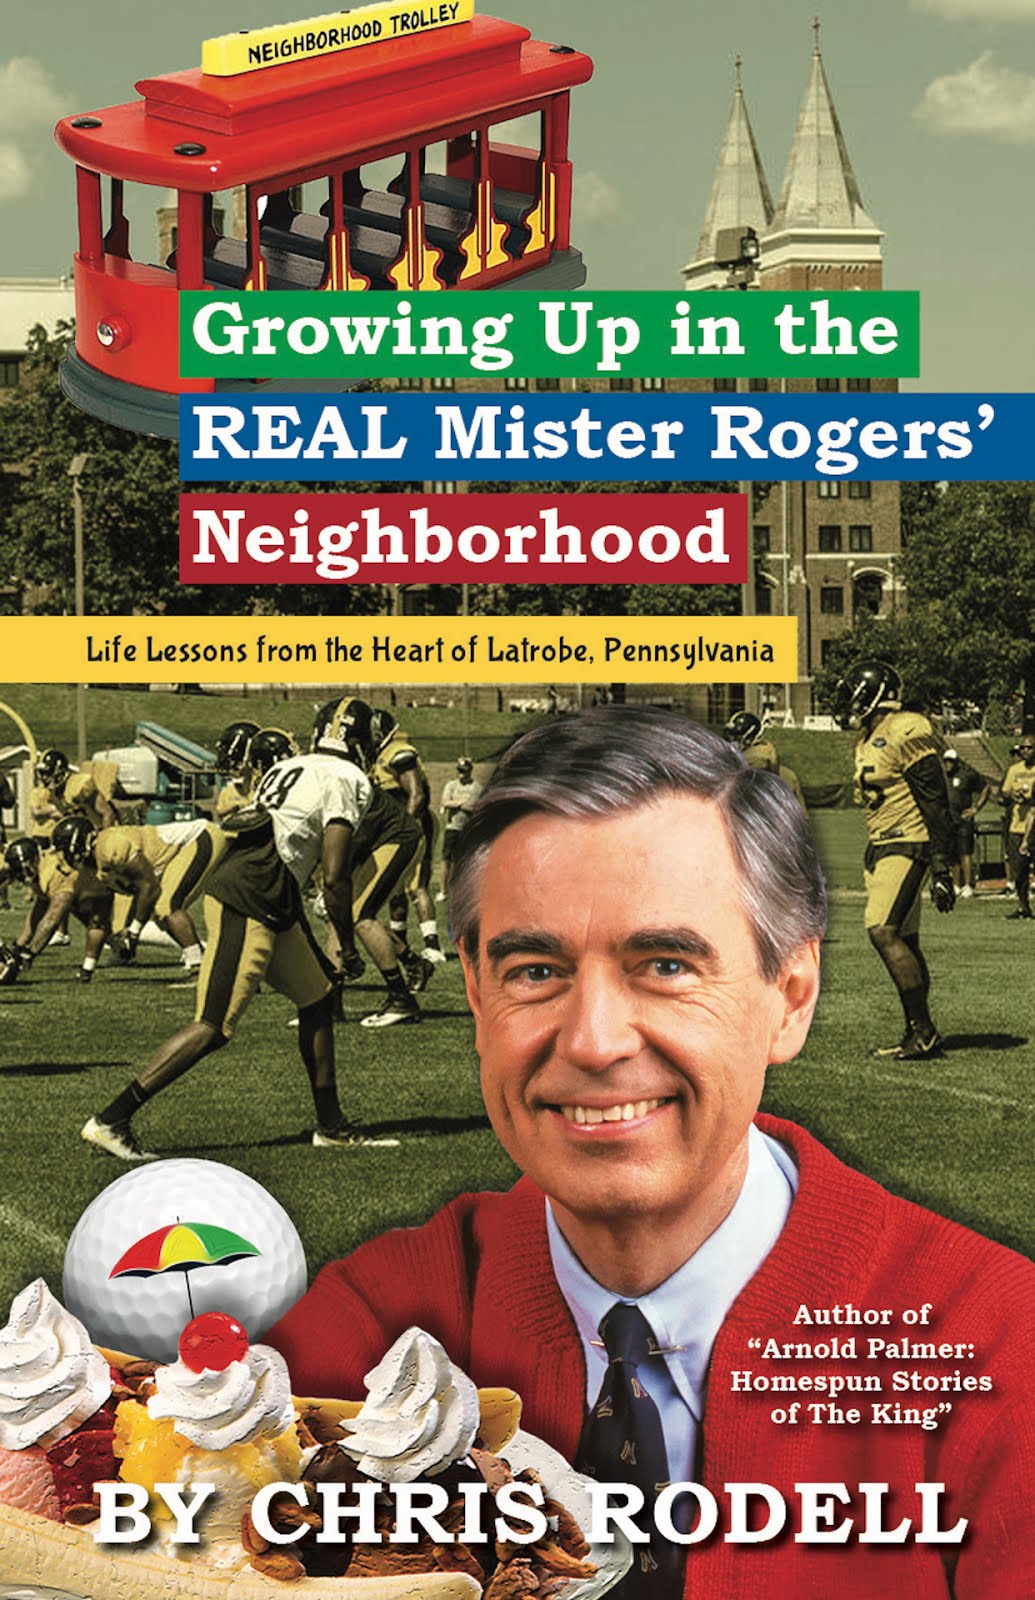 Mister Rogers book!